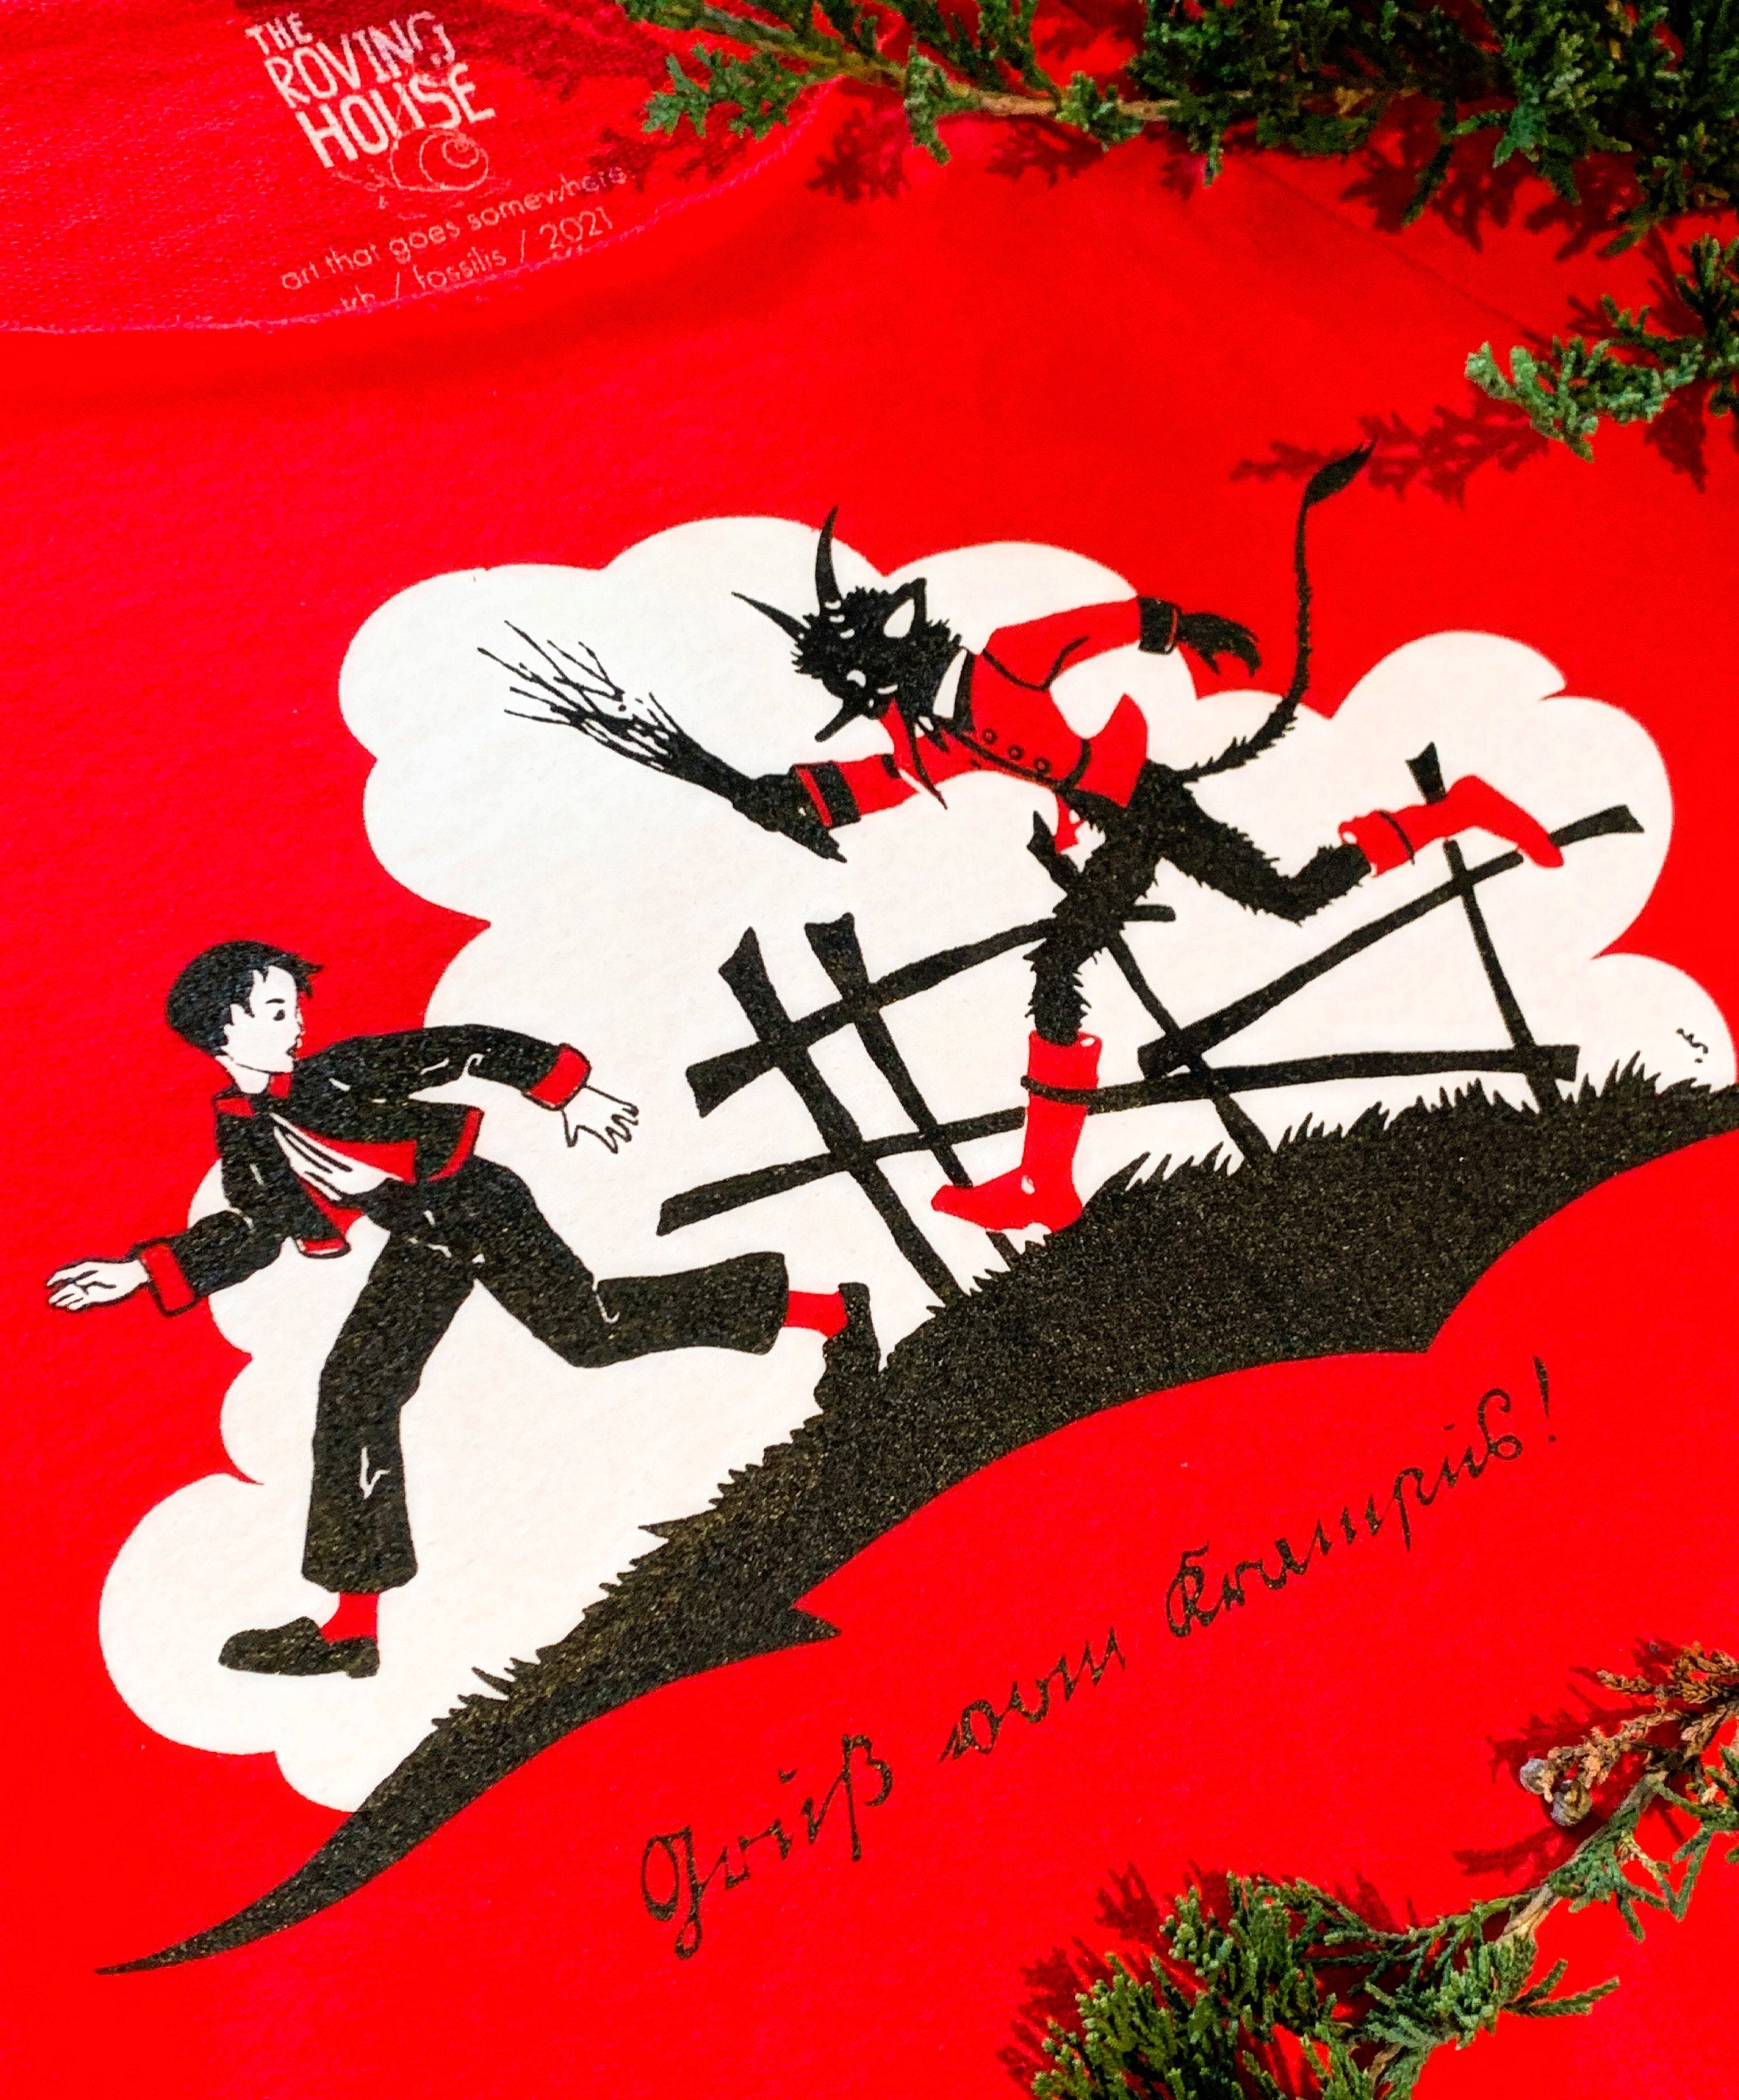 A closeup of a red, black, and white shirt design. Vintage 1900s artwork features Krampus with a bundle of sticks chasing a boy, with the words "Gruss vom Krampus!" (Greetings from Krampus!)